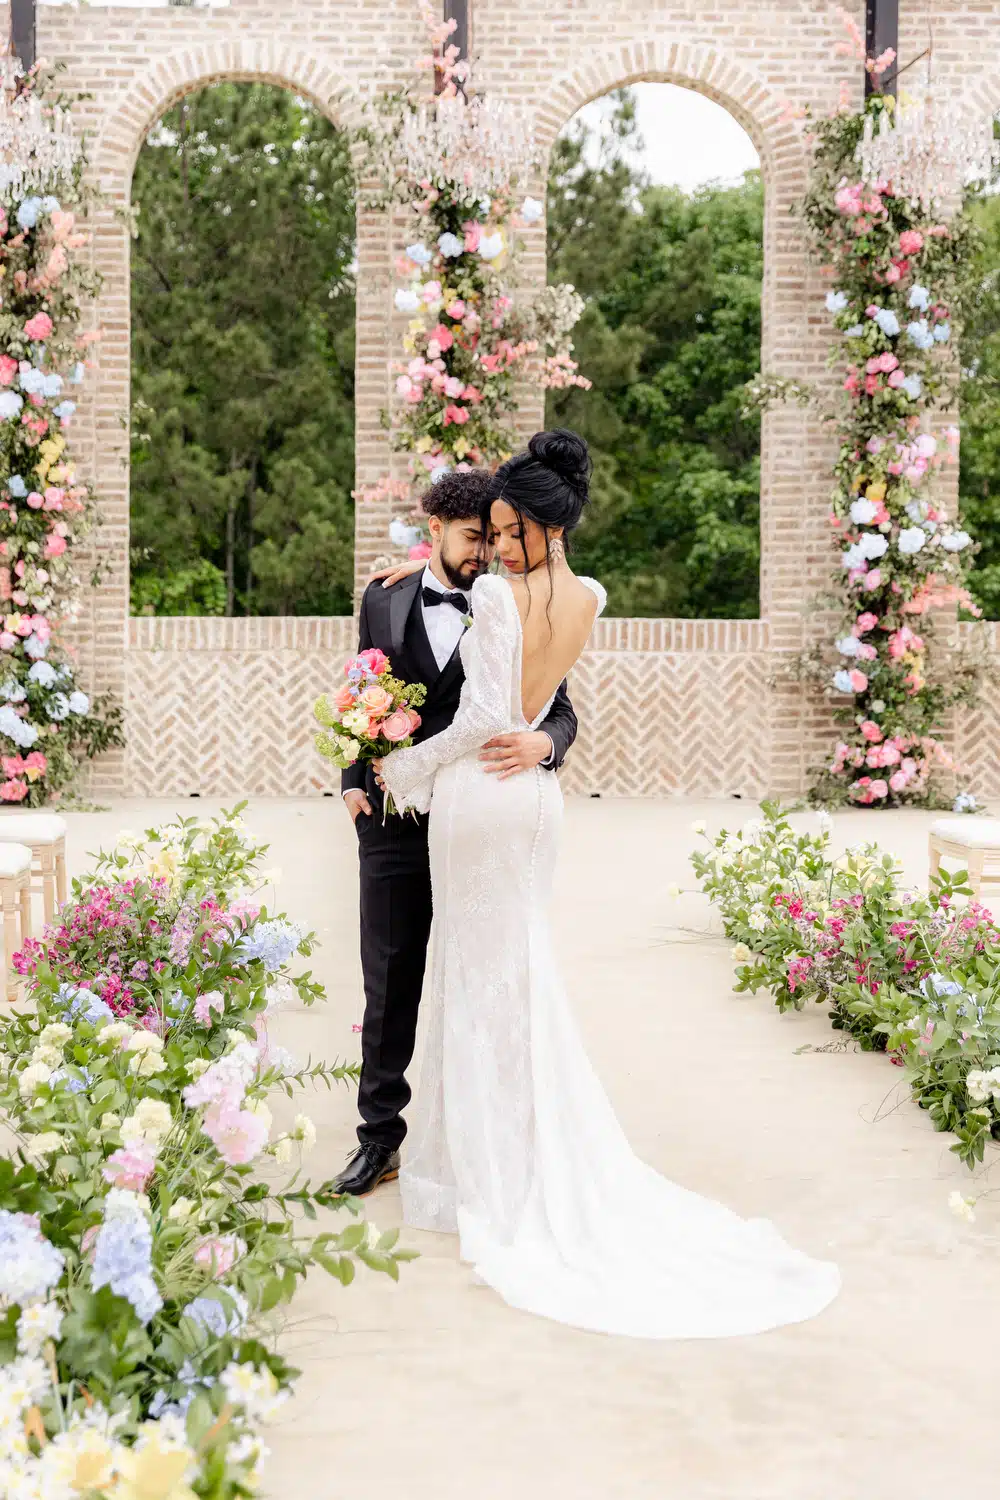 Groom wearing a black-tie wedding tuxedo holding a bride wearing a wedding gown outdoors in a colorful garden of flowers